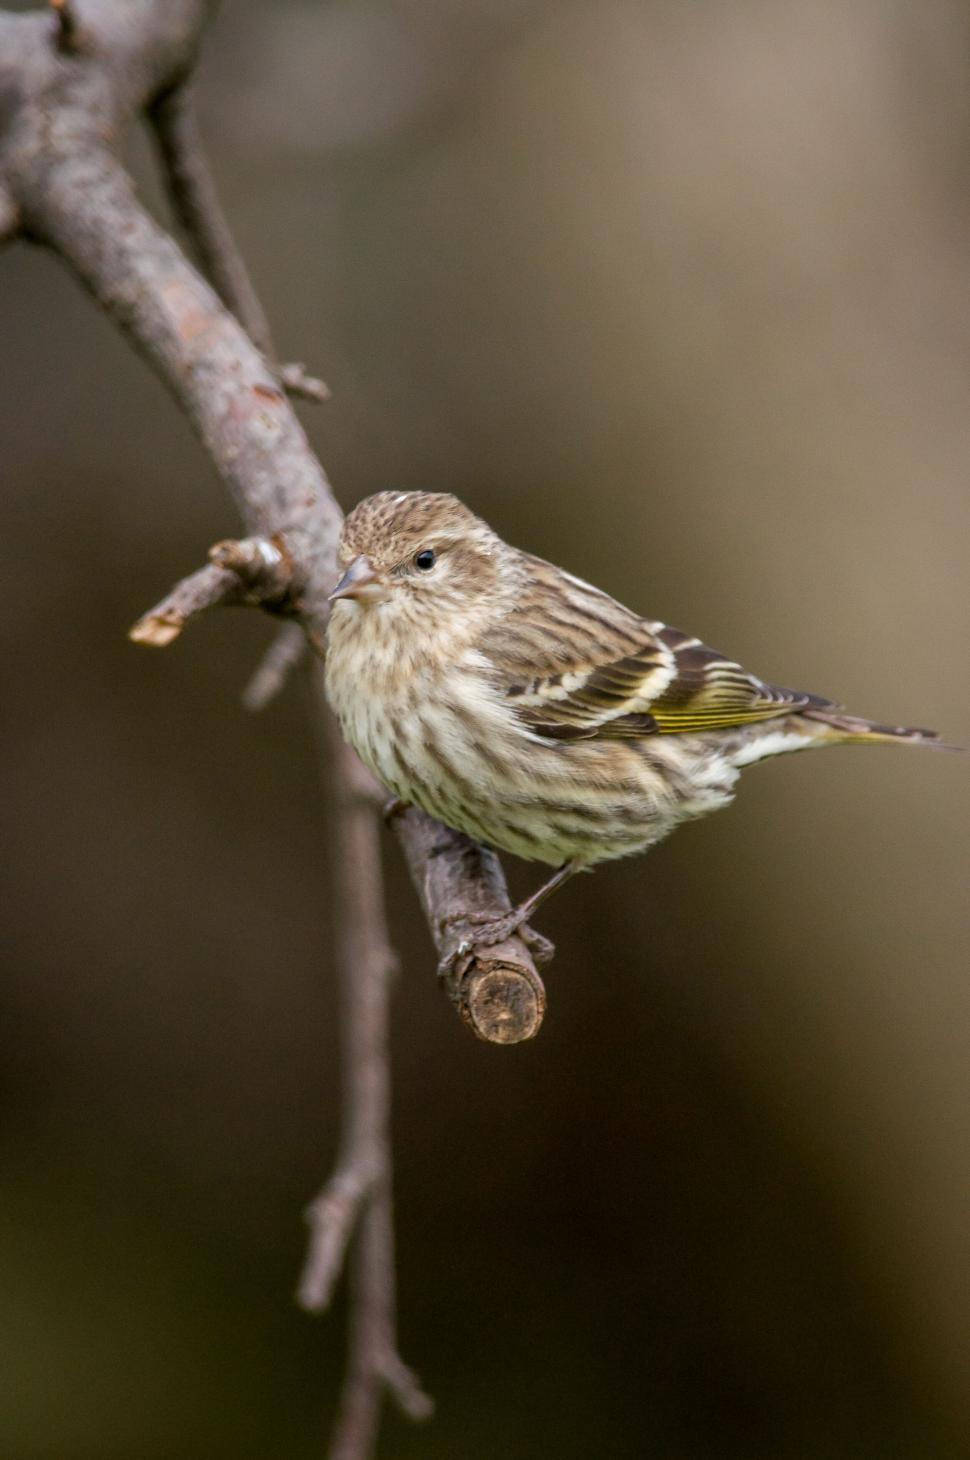 Free Image of Perched Pine Siskin Bird on a Branch 